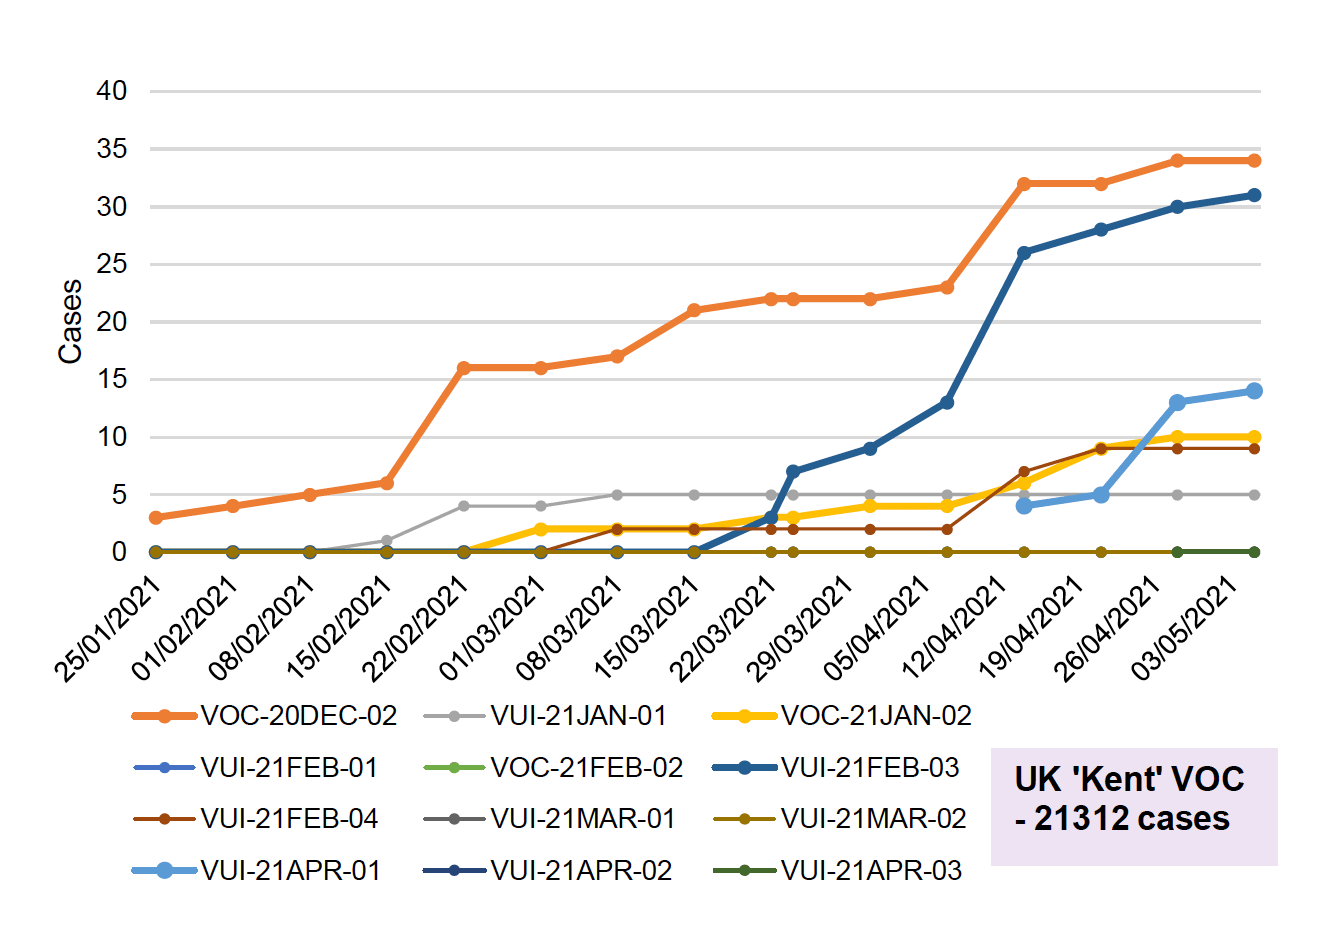 The figure shows the number of cases for the variants of concern and variants of interest detected by sequencing in Scotland during the period 25 January 2021 to 5 May 2021.
VOC-20DEC-02, first found in South Africa, has been increasing steadily since late January from 3 cases initially and is currently at 34 cases. However, there was no increase in the past week. VUI-21FEB-03, first identified in Nigeria, has seen a rapid increase since mid-March and started to slow in recent weeks, increasing by 1 in the past week to 31 genomically confirmed cases. There are also 14 cases of VUI-21APR-01, first identified in India, an increase of 1 since last week.
